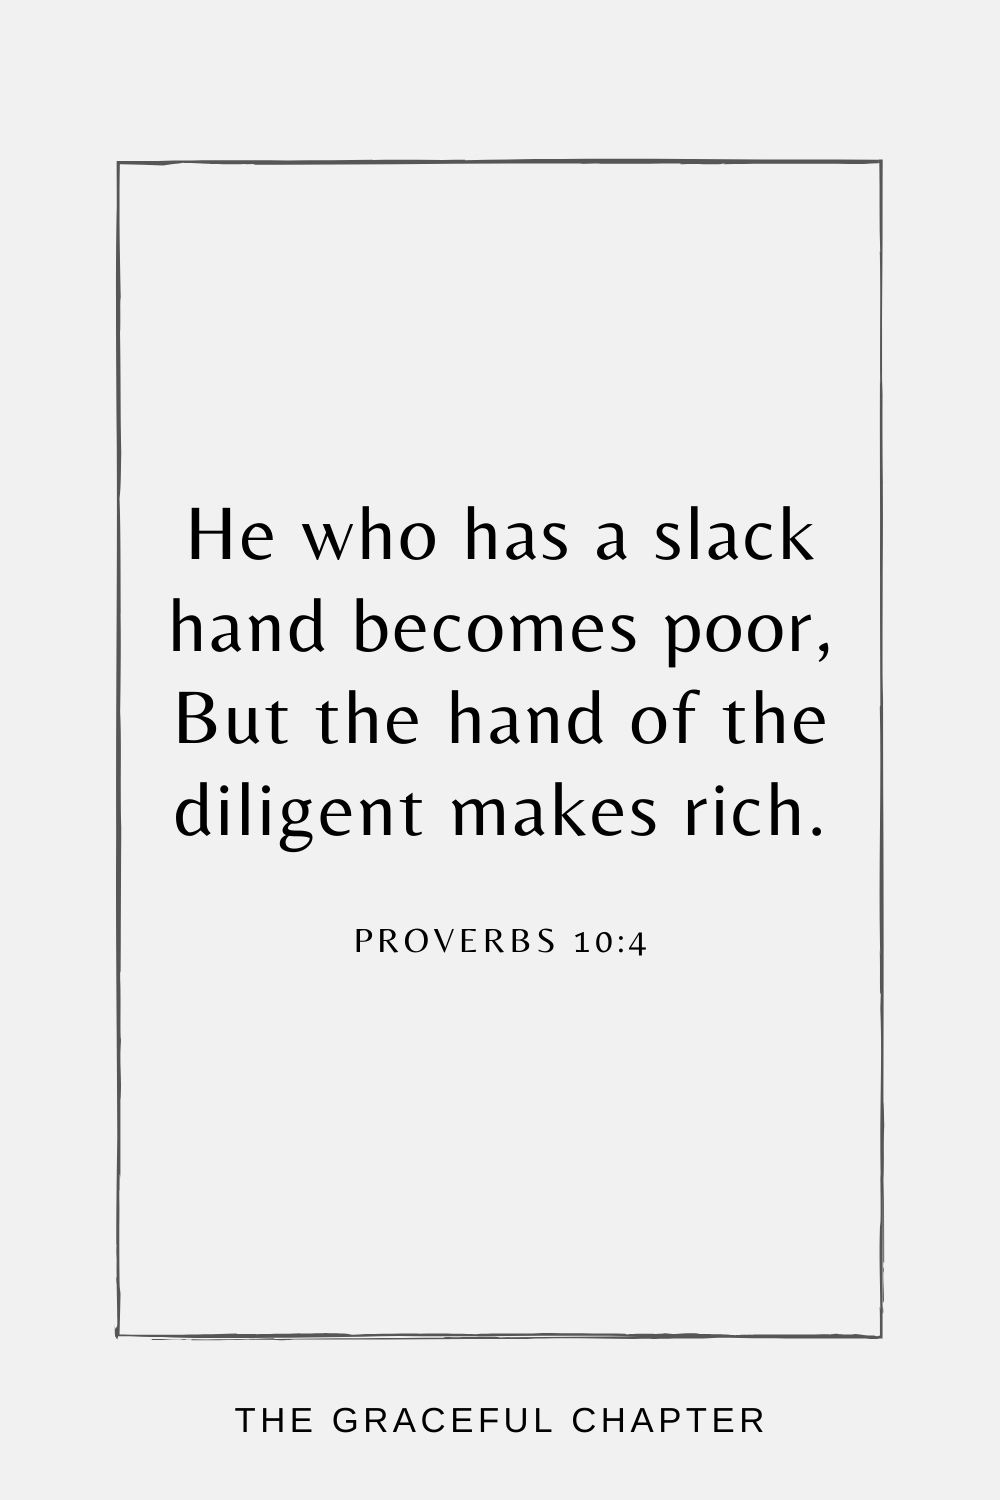 He who has a slack hand becomes poor, But the hand of the diligent makes rich. Proverbs 10:4